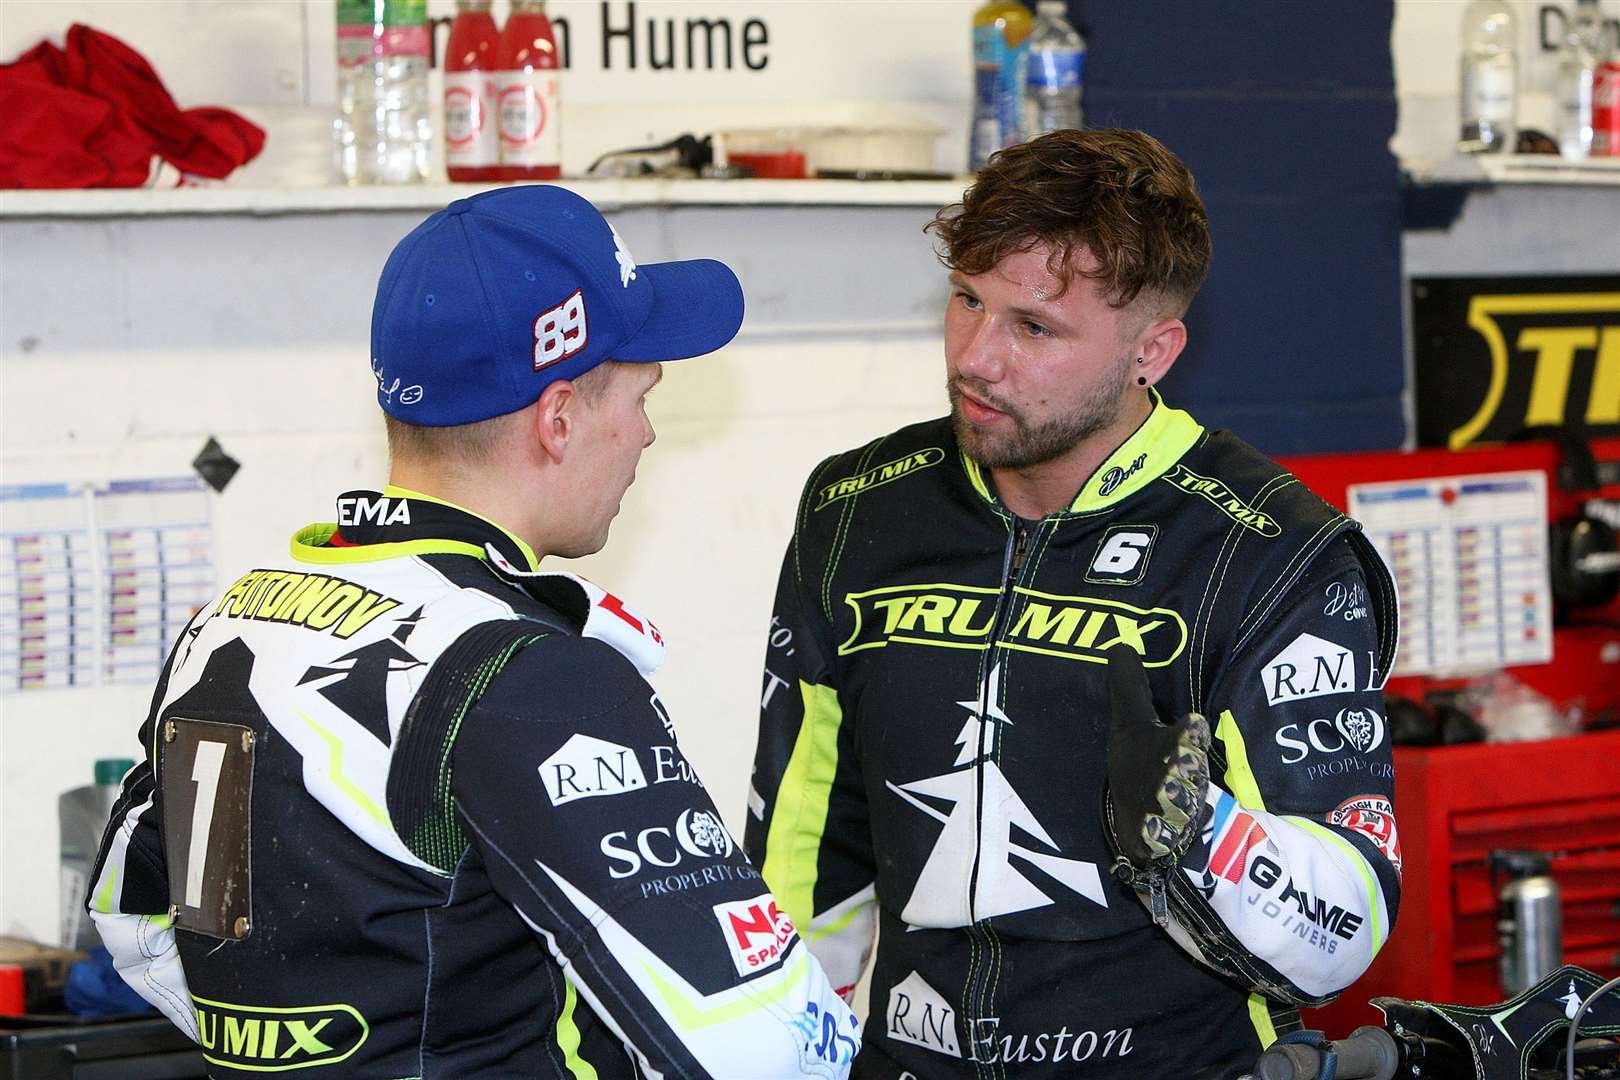 Danyon Hume, who rode in the British Final at Belle Vue on Monday night, talks to Emil Sayfutdinov in the pits at Ipswich last week. Picture: Phil Hilton